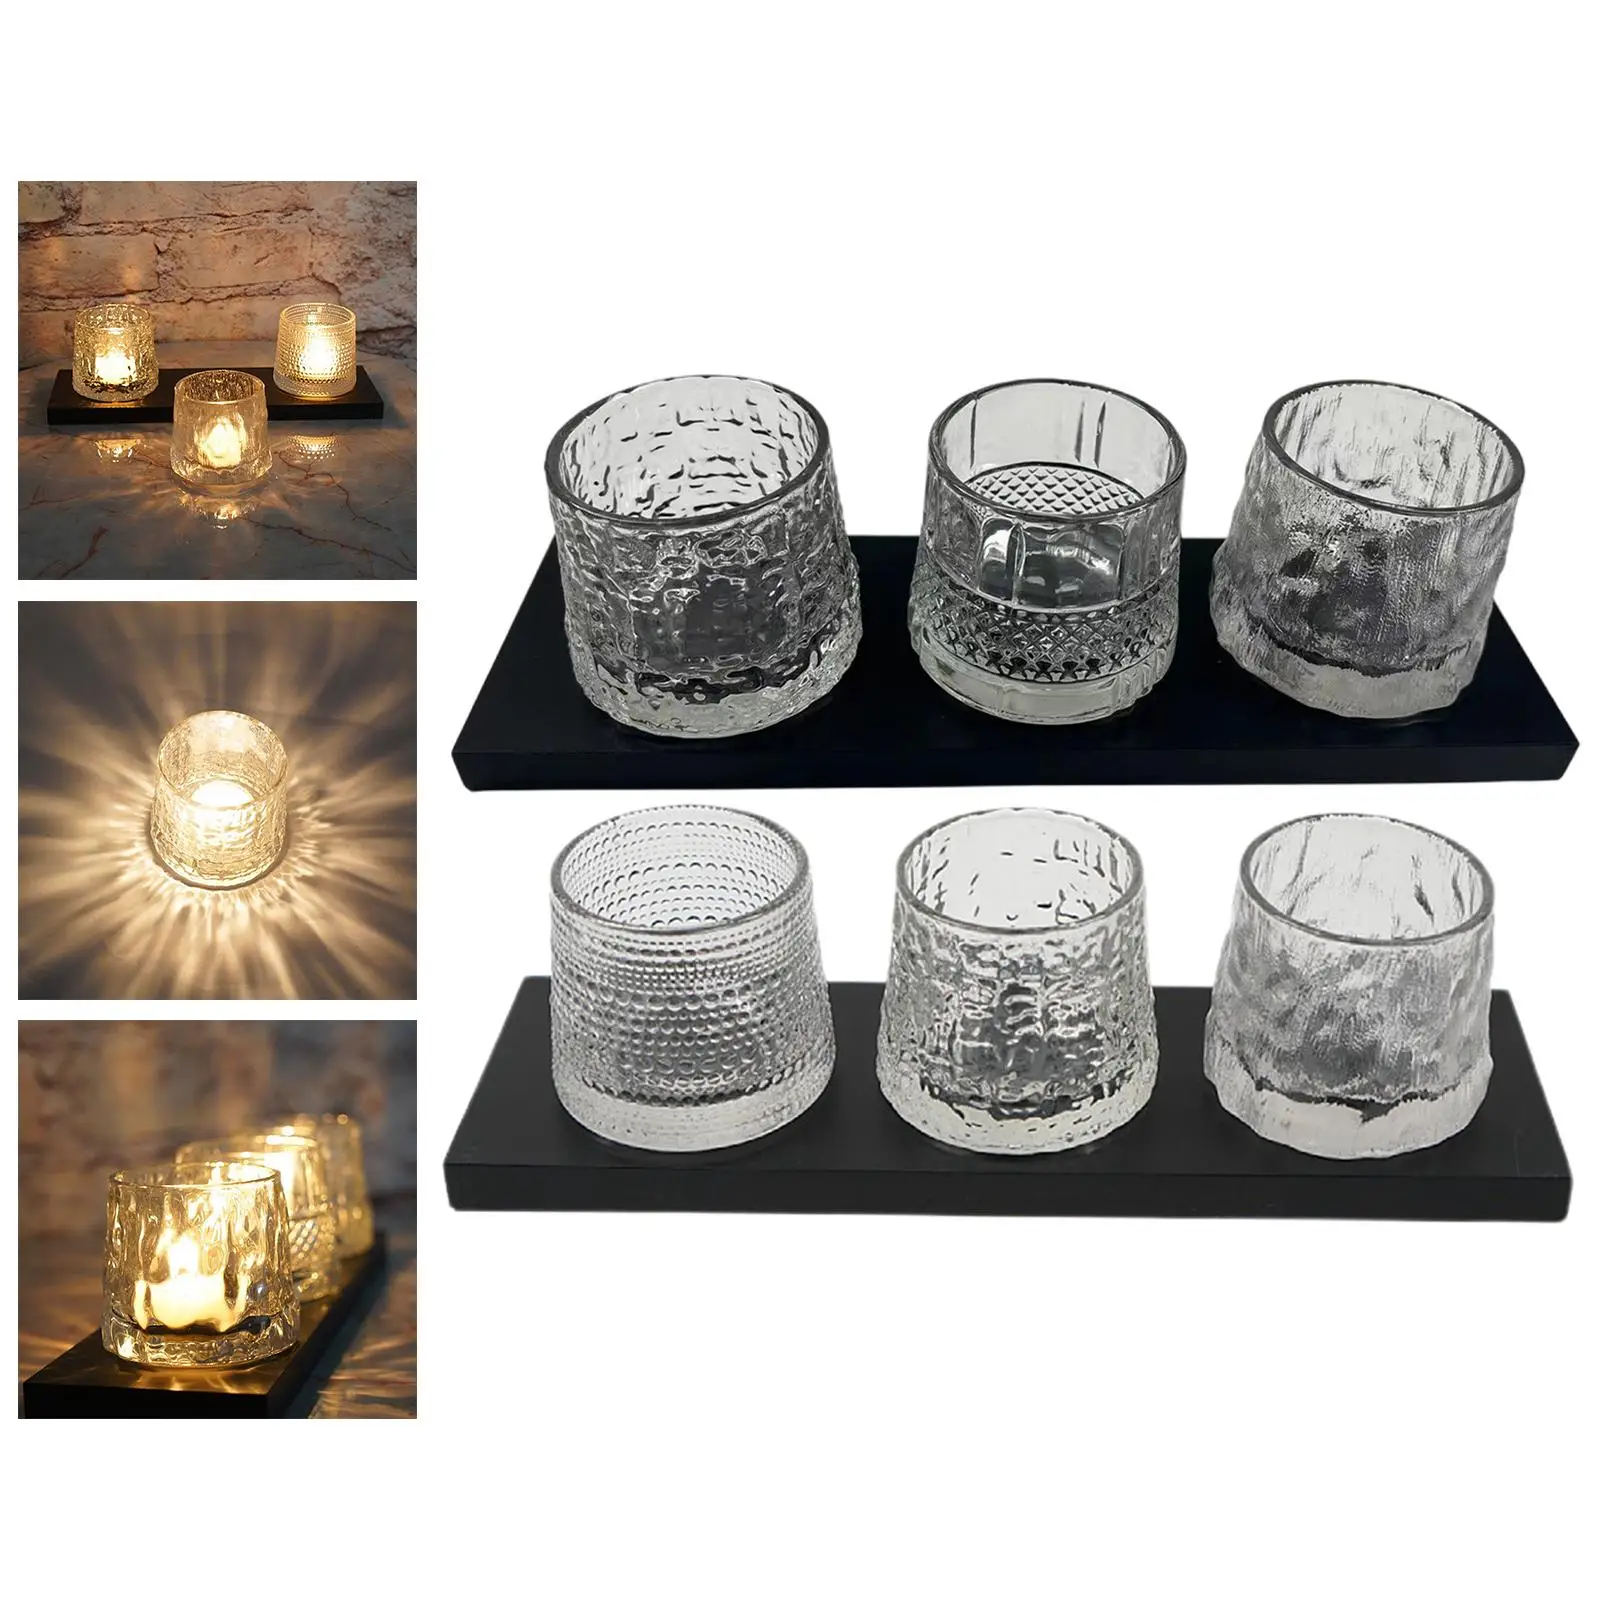 3x Candlestick Portable Classic Candleholder Candle for Dinner Mantel Living Banquet